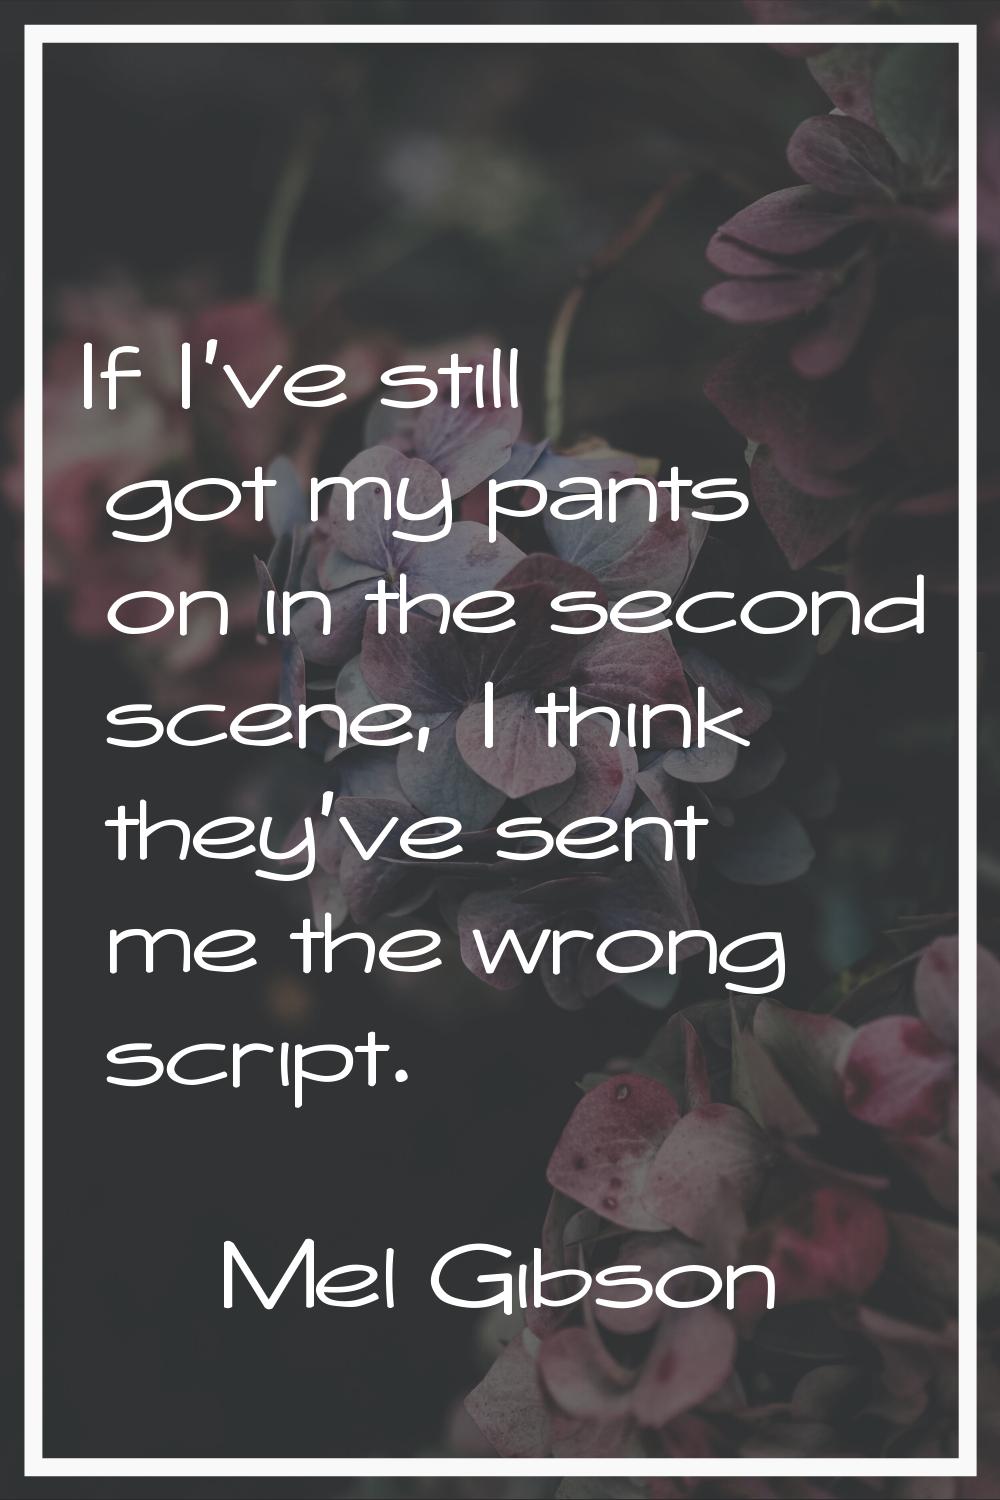 If I've still got my pants on in the second scene, I think they've sent me the wrong script.